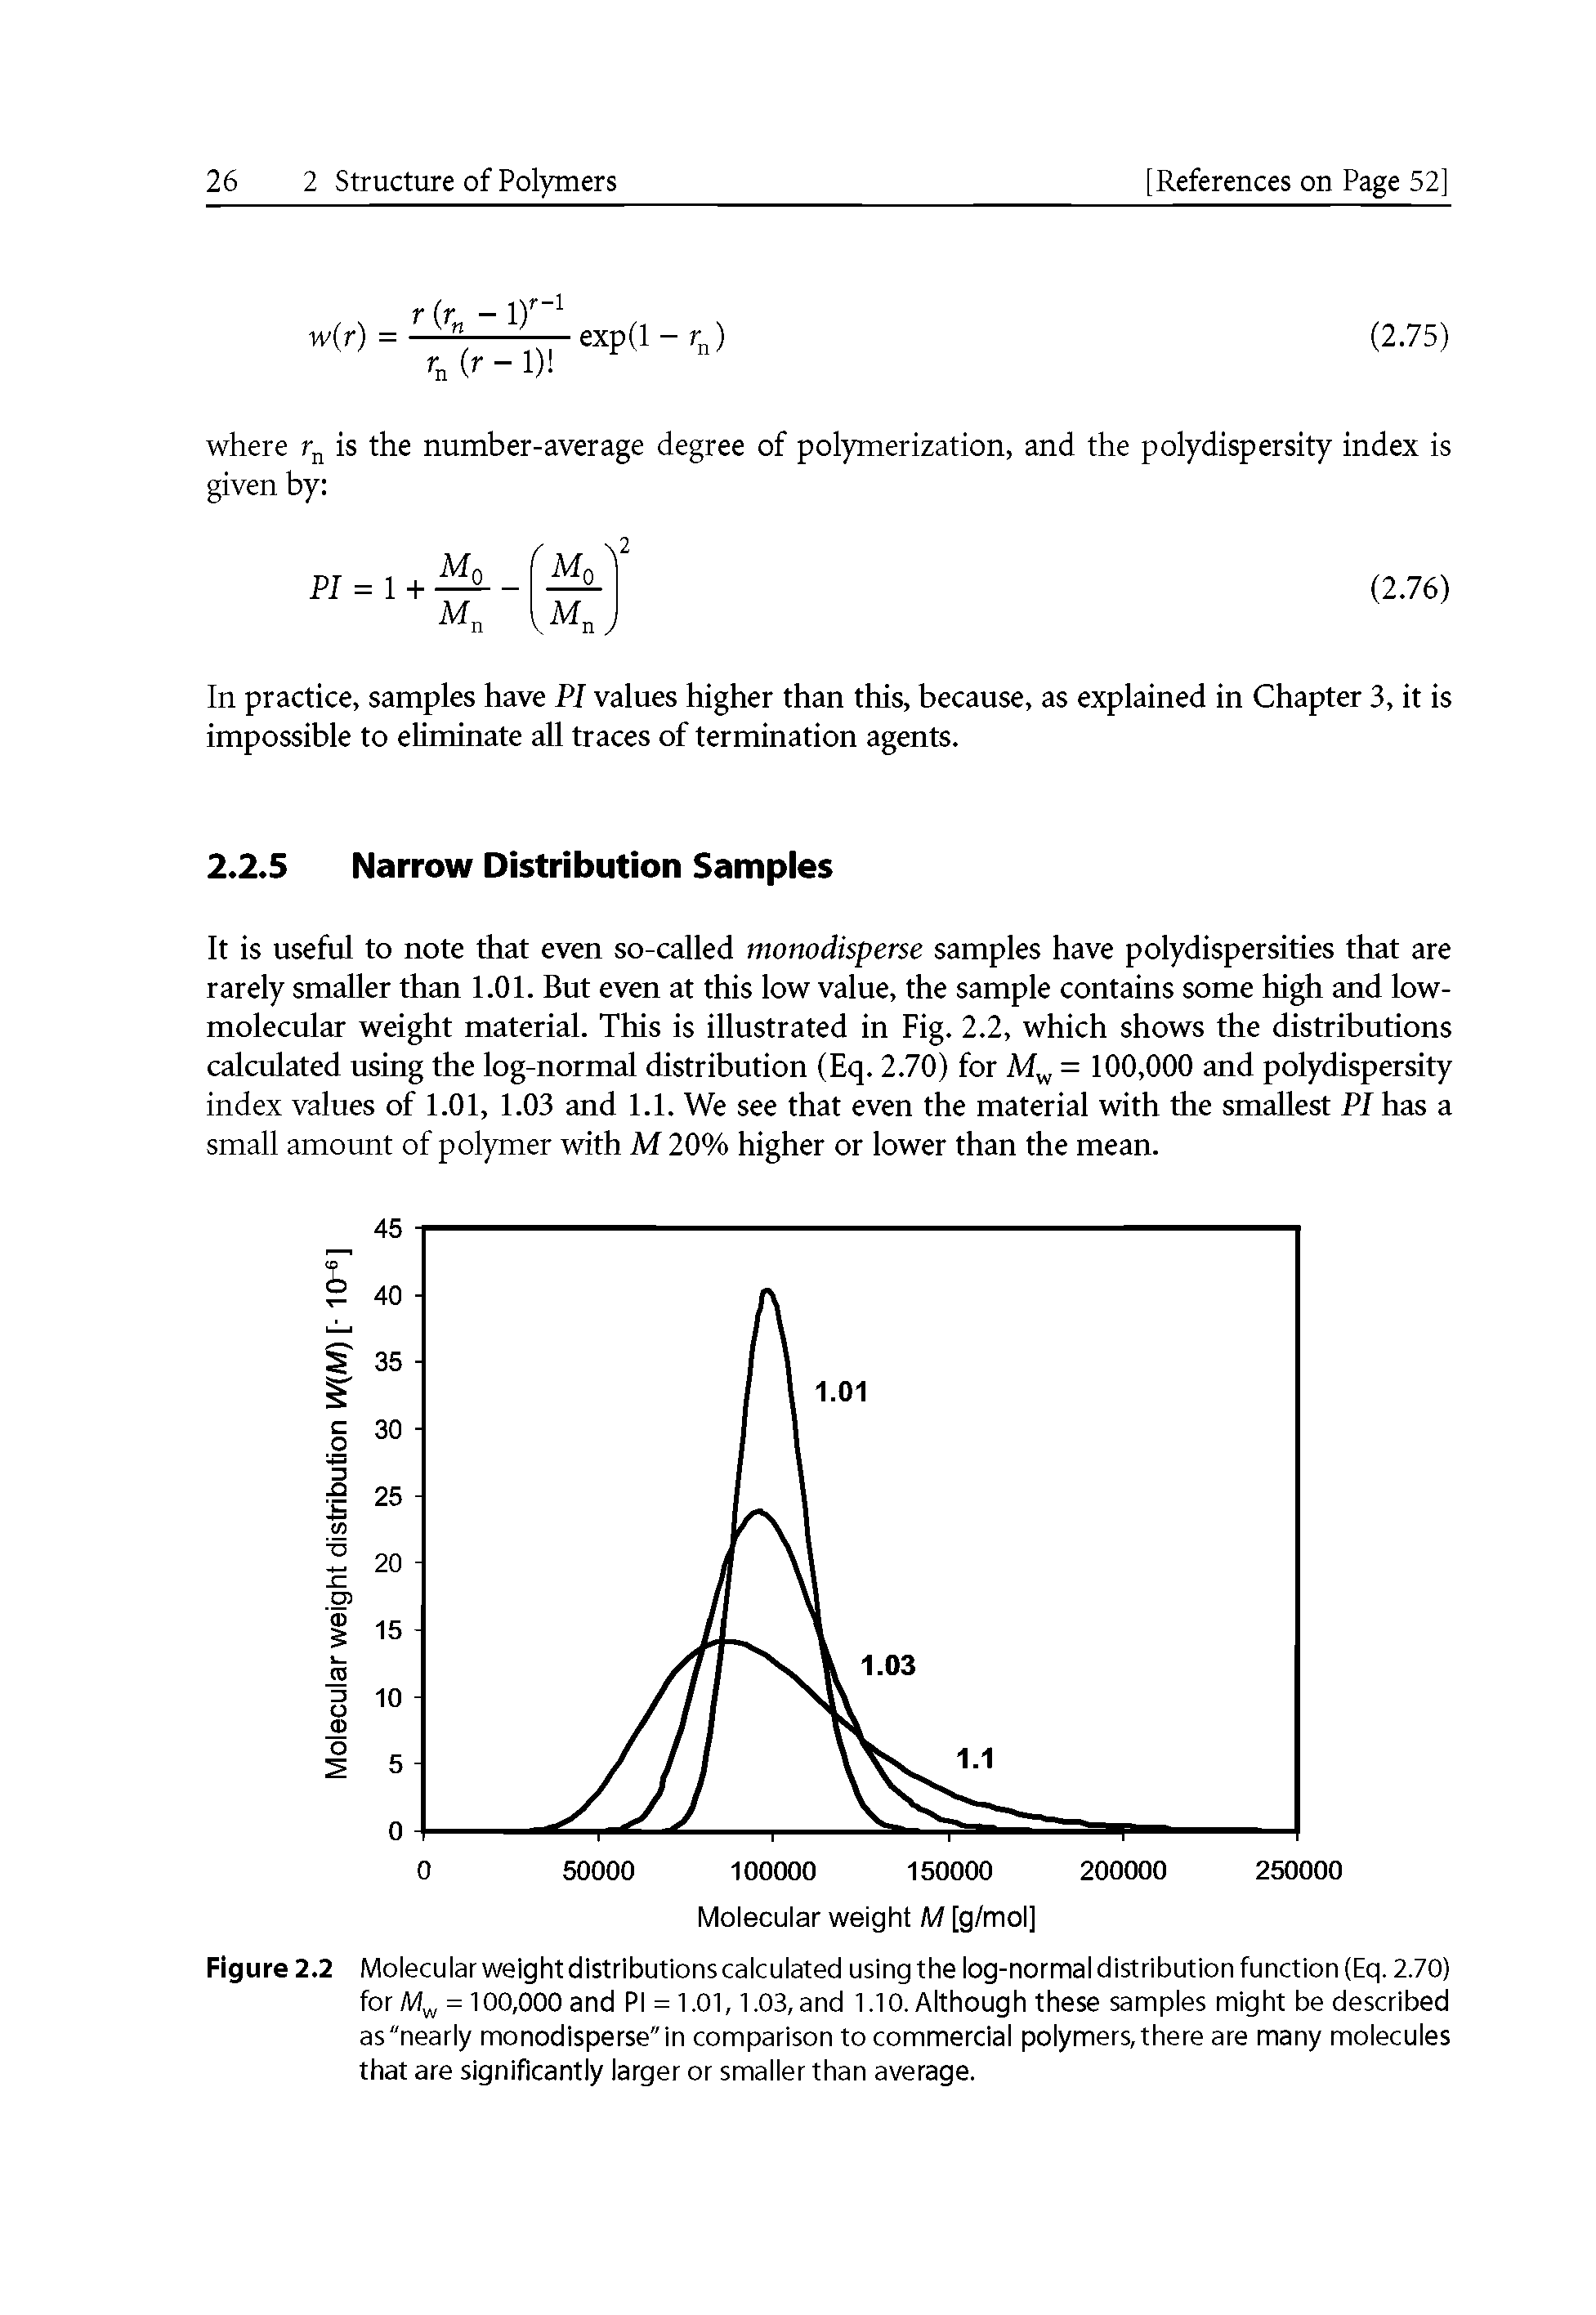 Figure 2.2 Molecular weight distributions calculated using the log-normal distribution function (Eq. 2.70) for = 100,000 and PI = 1.01,1.03, and 1.10. Although these samples might be described as "nearly monodisperse" in comparison to commercial polymers, there are many molecules that are significantly larger or smaller than average.